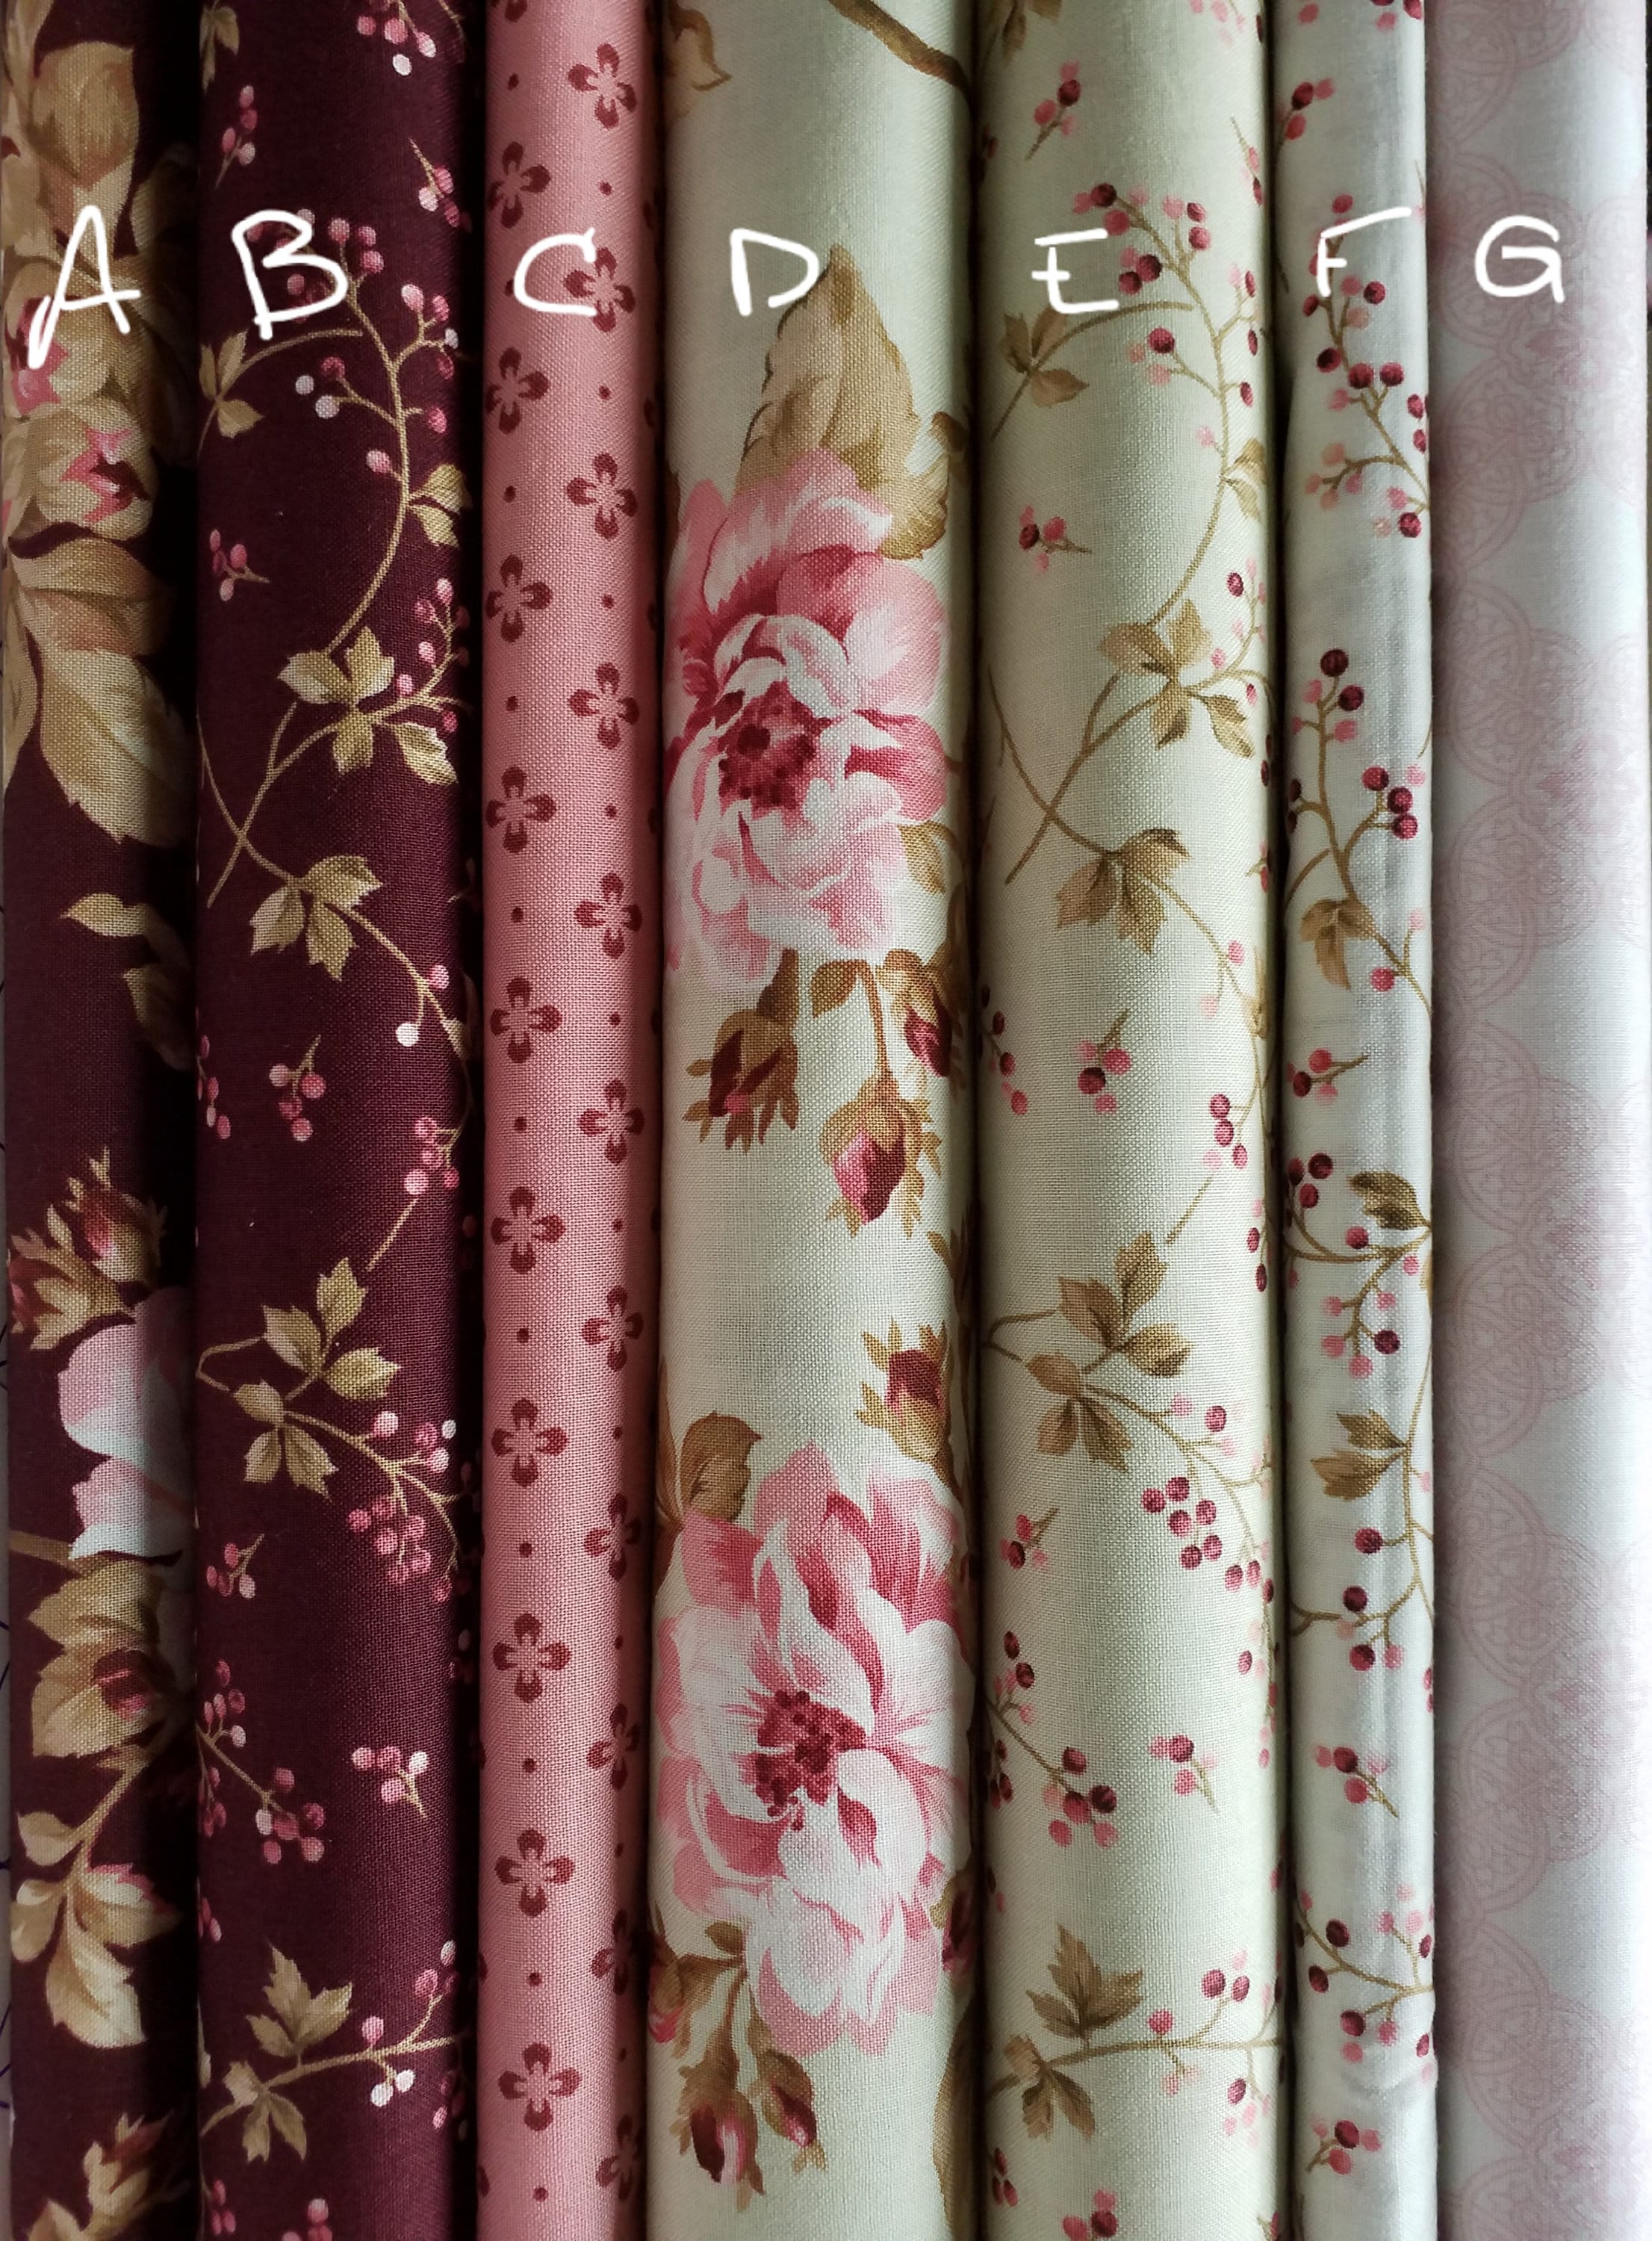 Dusty Fall Floral Fabric by the Yard. Watercolor Florals, Burgundy, Autumn,  Fall Fabric, Botanical. Quilt Cotton, Knit, Jersey or Minky 